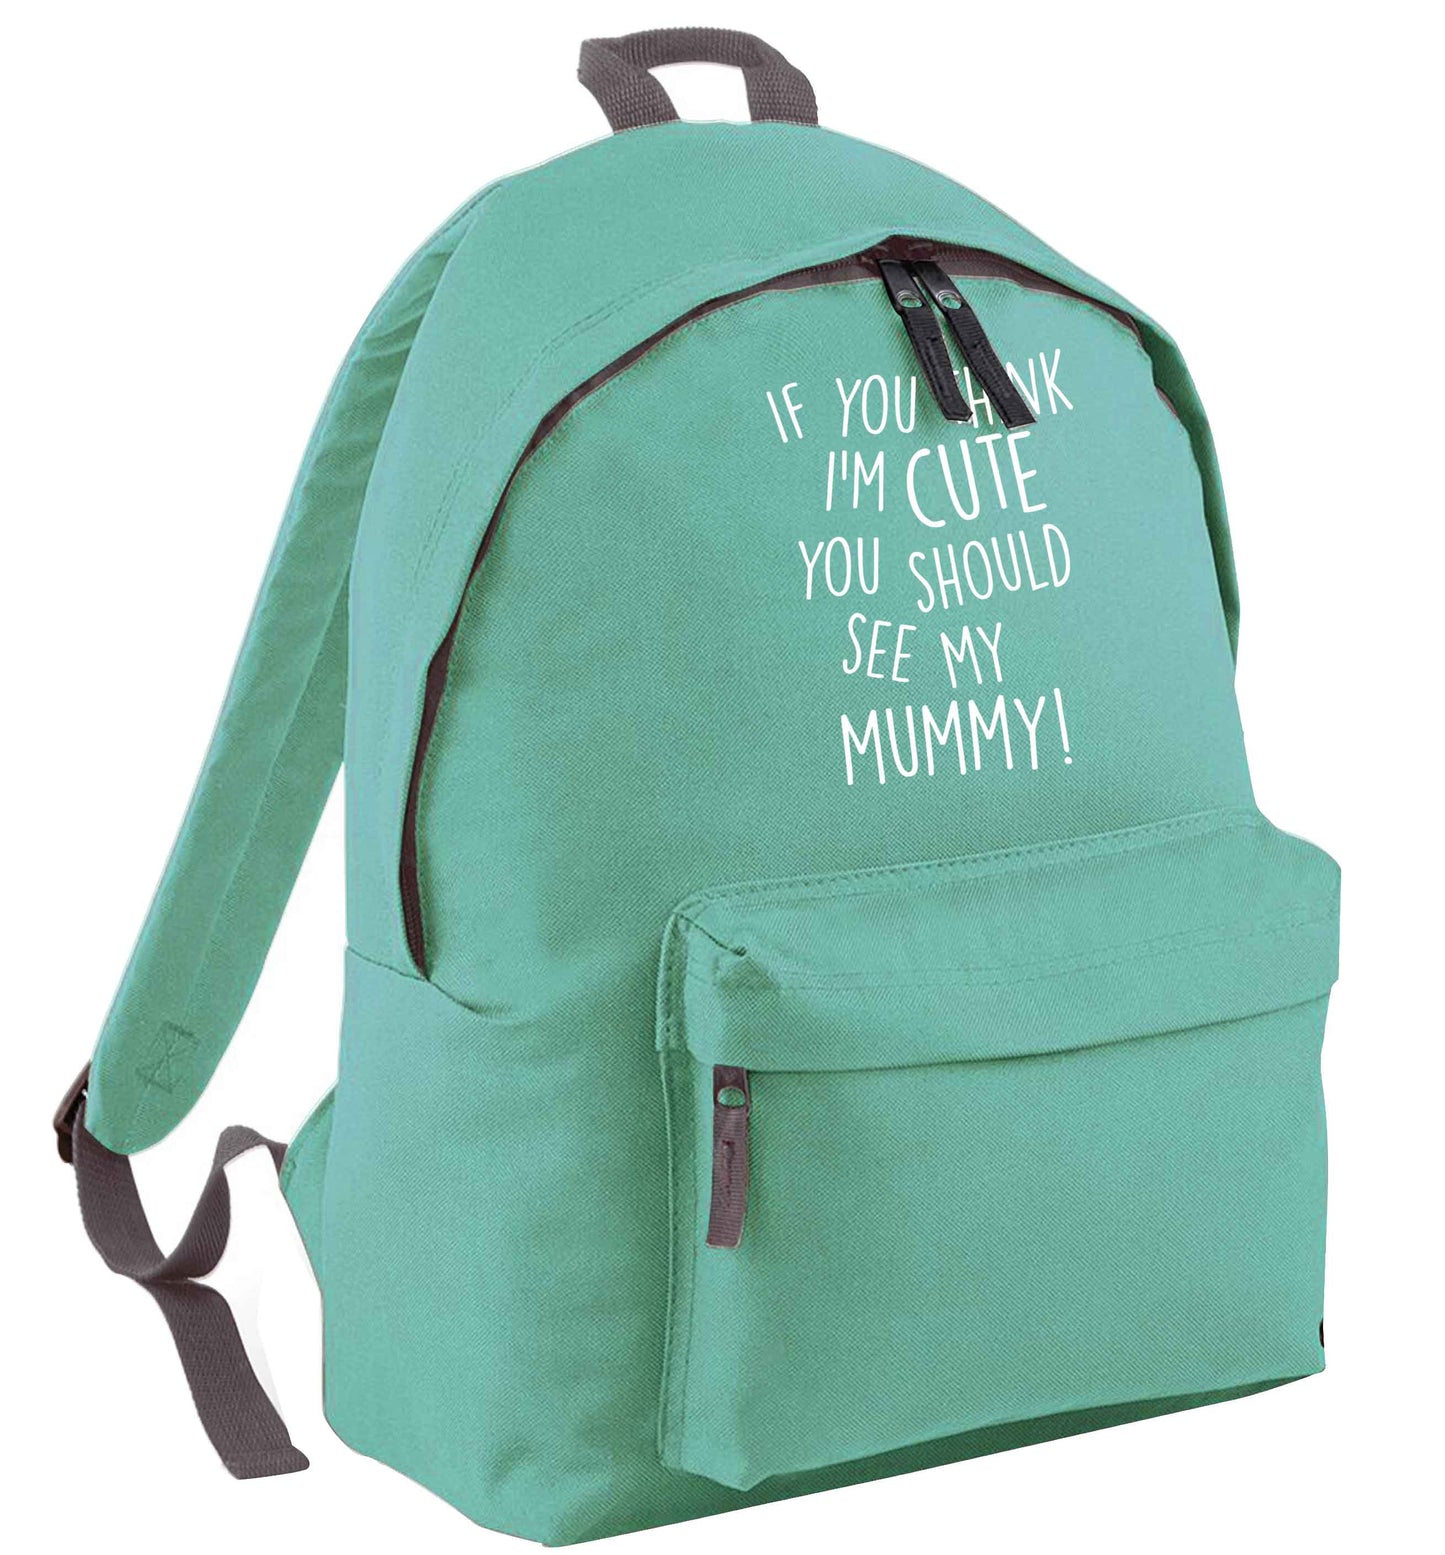 If you think I'm cute you should see my mummy mint adults backpack